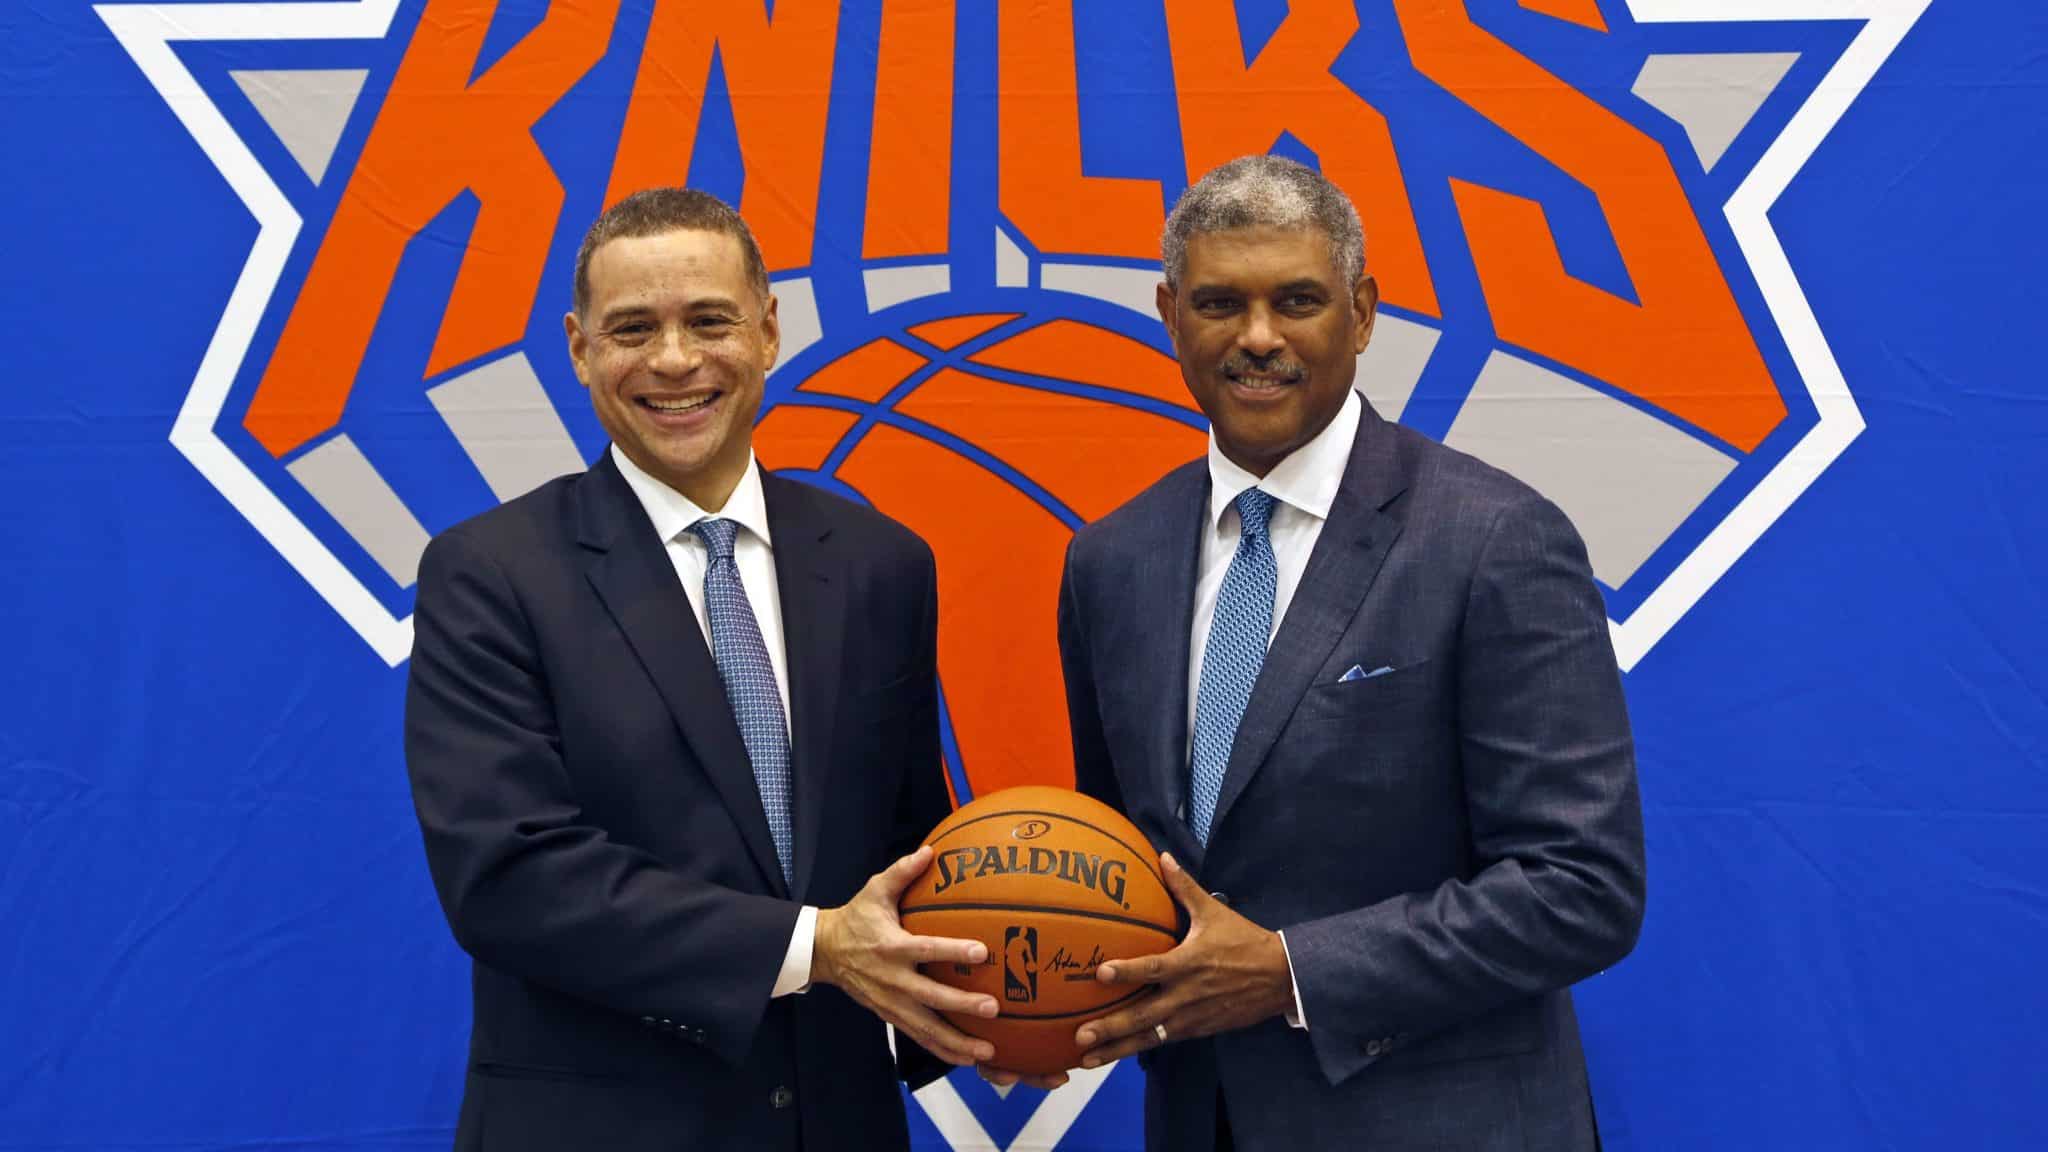 This July 17, 2017, file photo shows New York Knicks general manager Scott Perry (left) and president Steve Mills posing for a picture after a news conference in Greenburgh, New York. Mills and Perry are trying to change the identity of the New York Knicks.